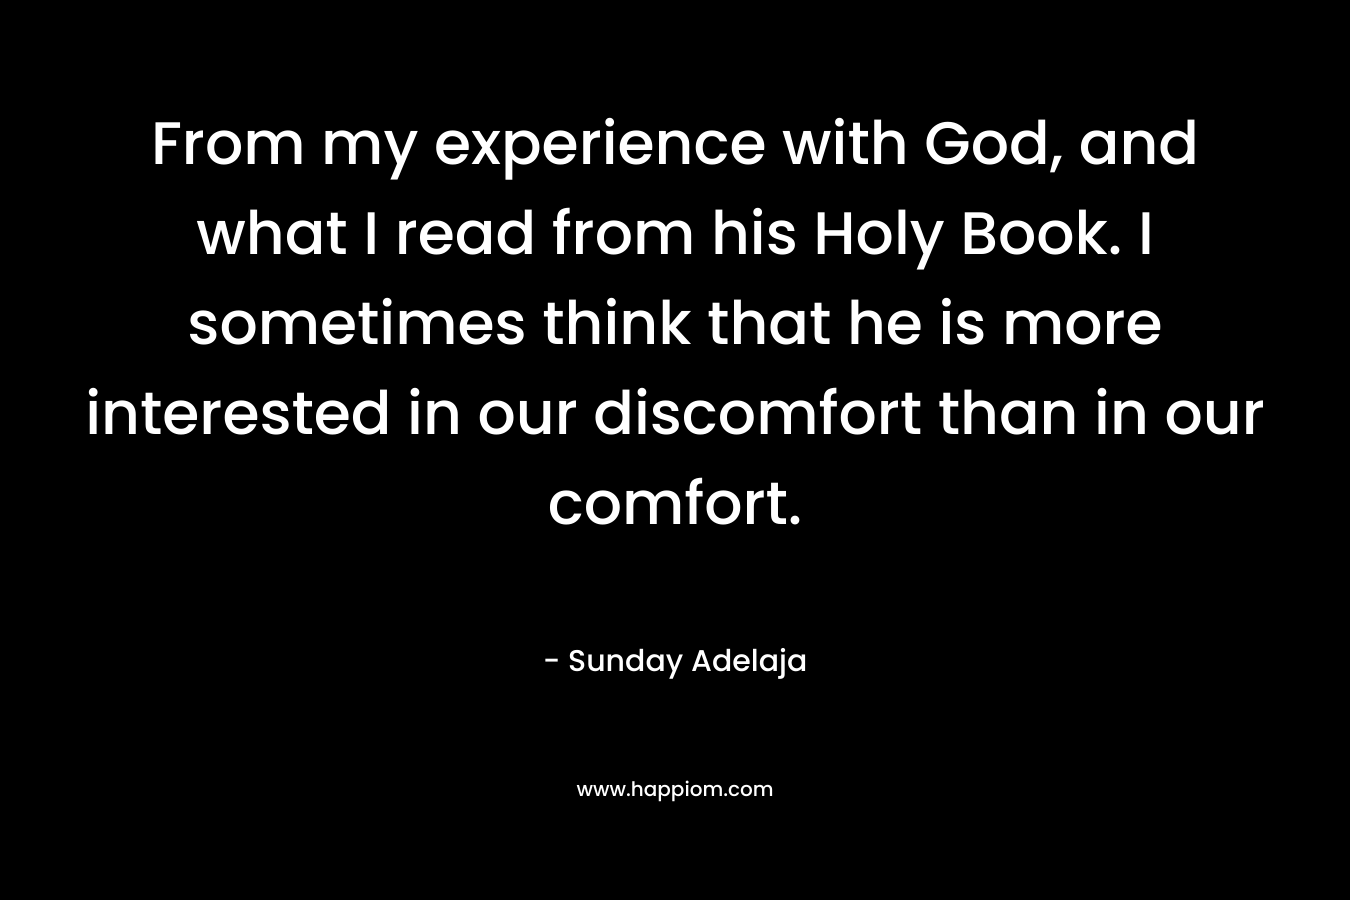 From my experience with God, and what I read from his Holy Book. I sometimes think that he is more interested in our discomfort than in our comfort.